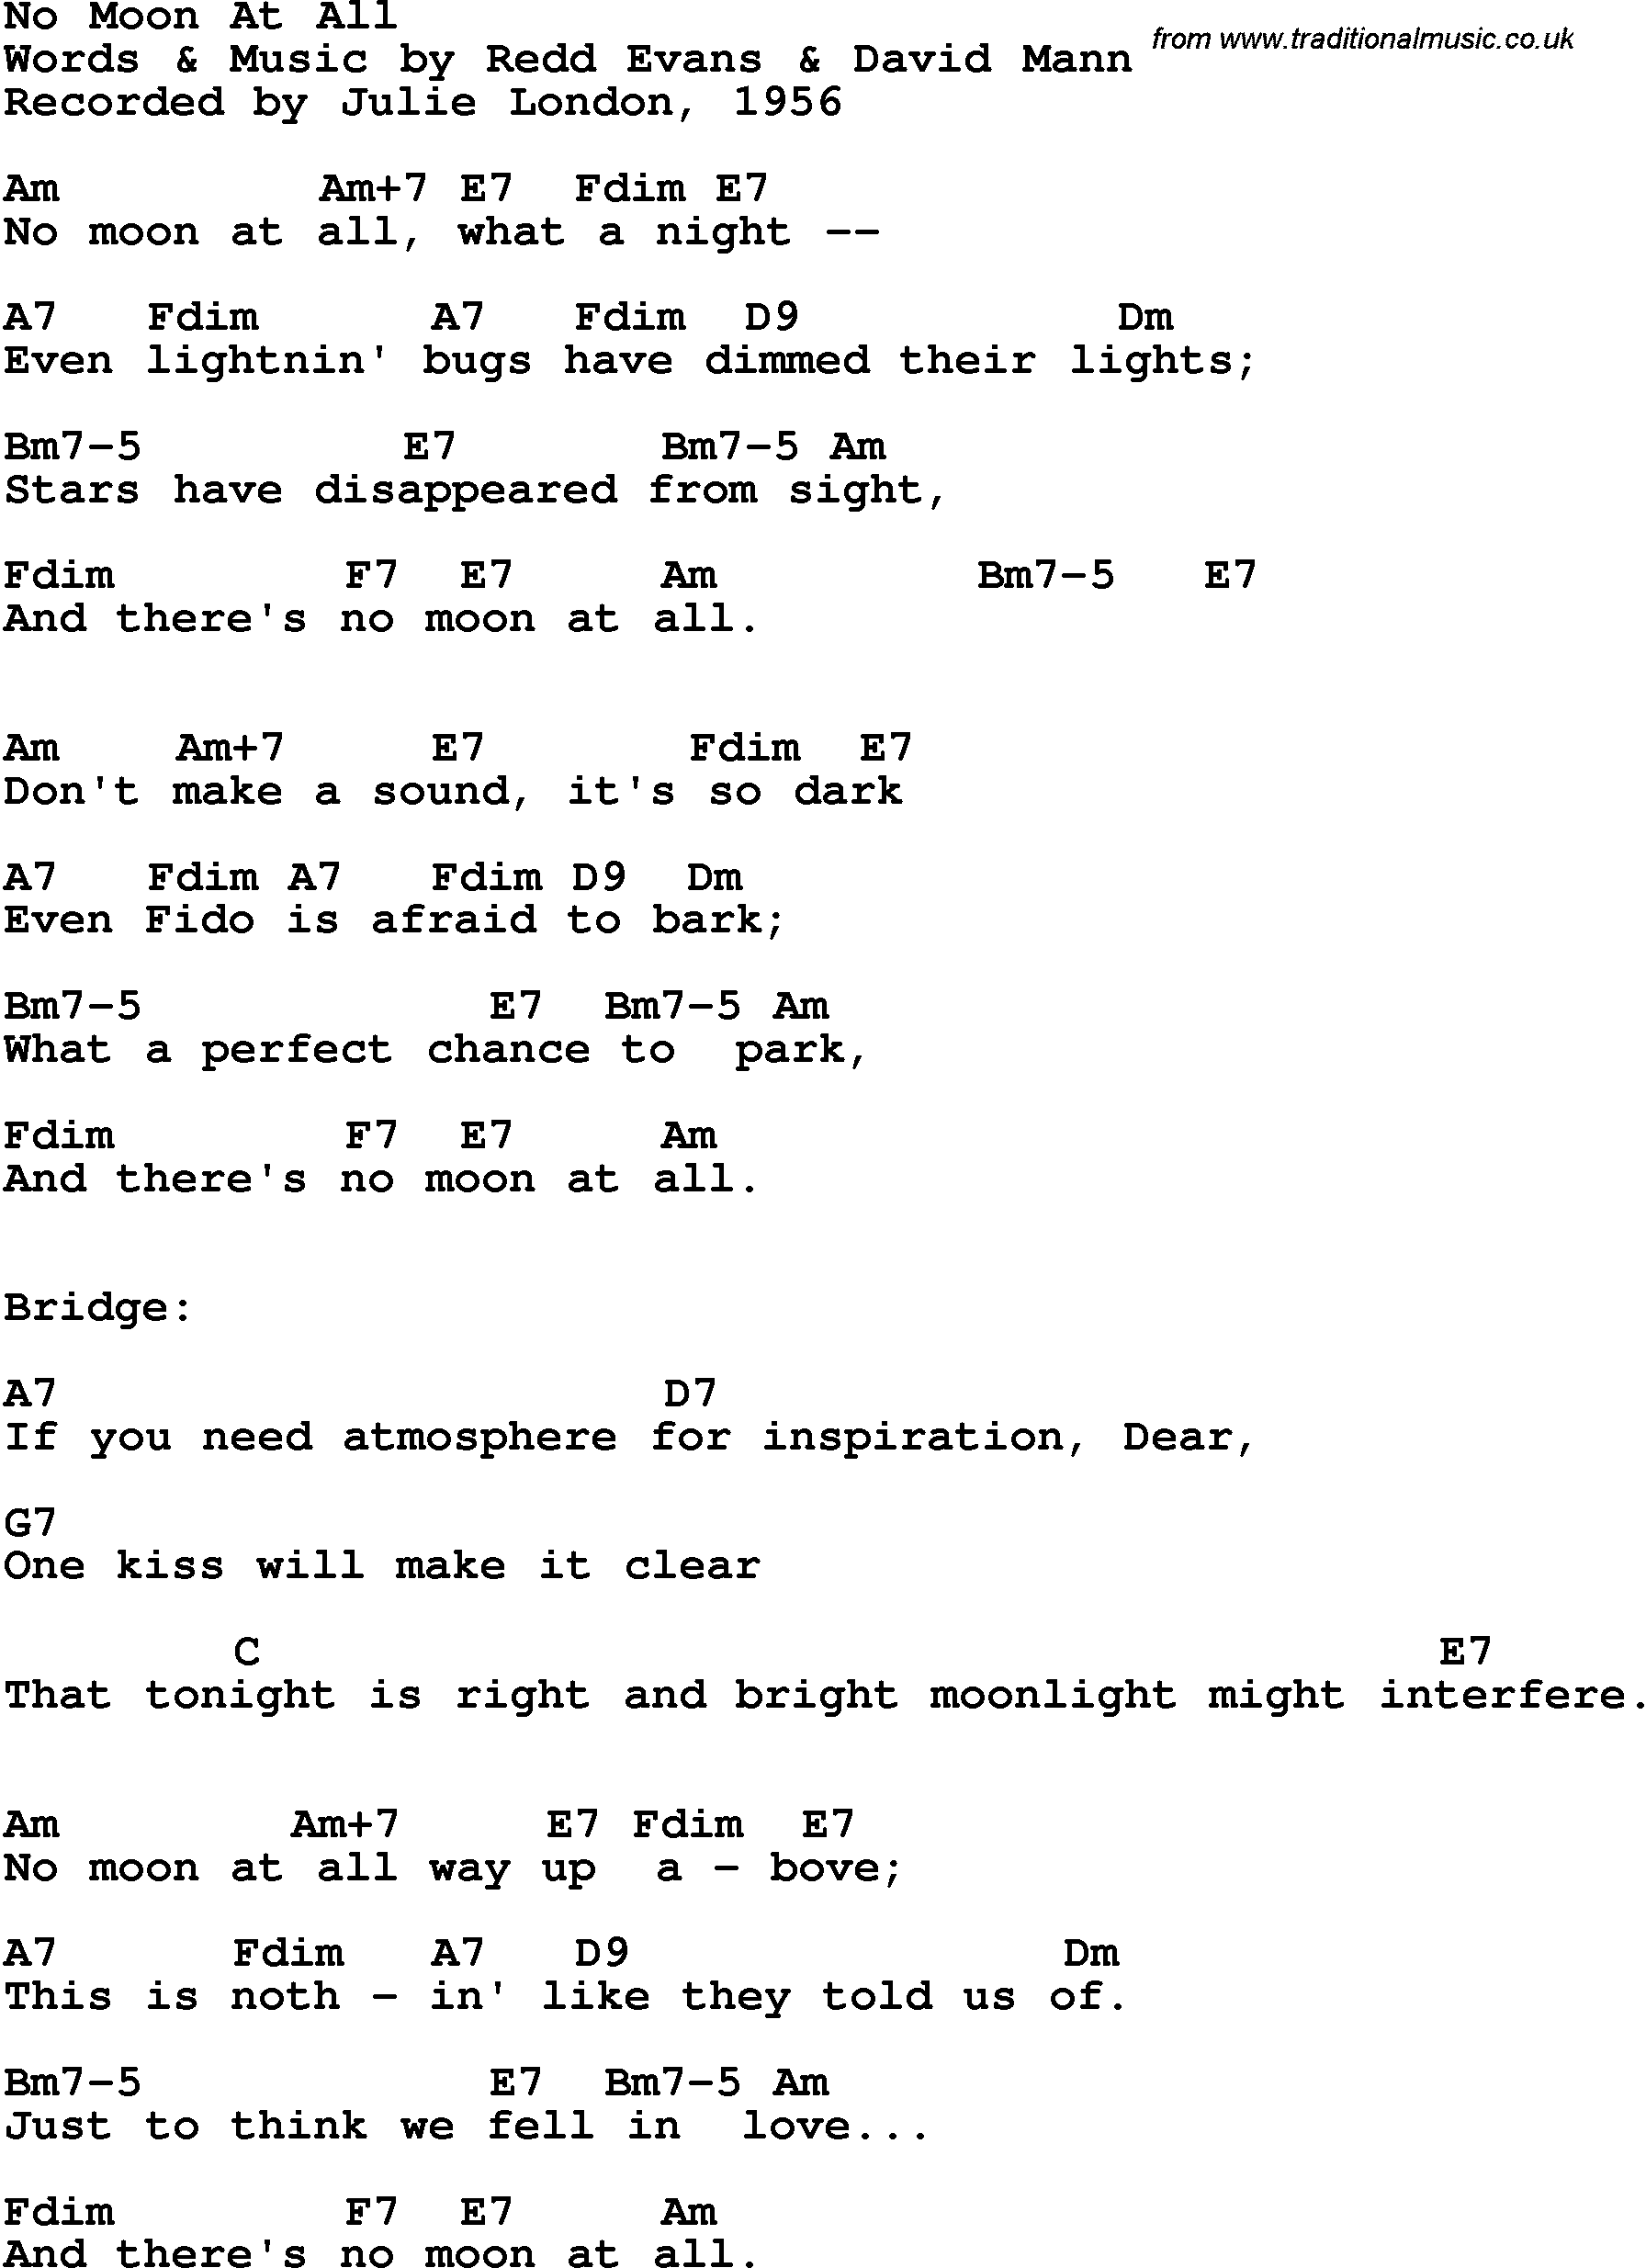 Song Lyrics with guitar chords for No Moon At All - Julie London, 1956